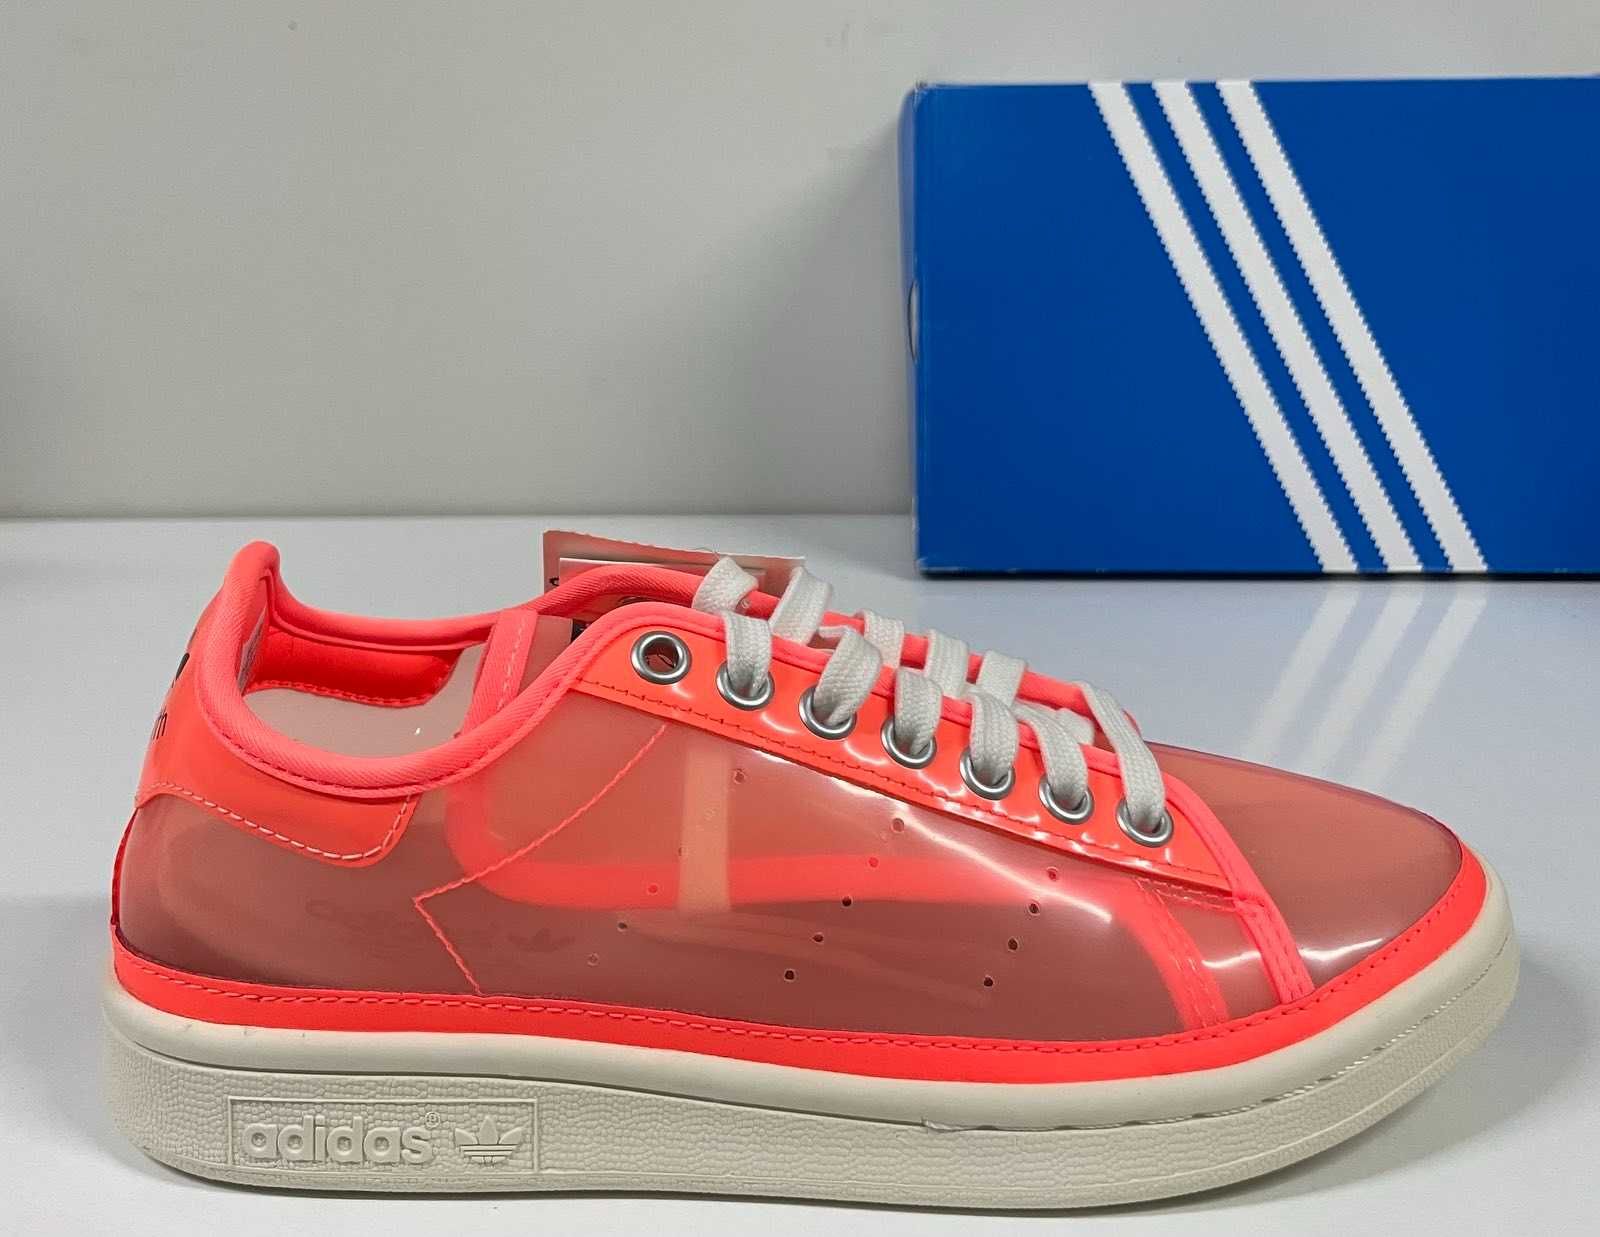 Adidas Stan Smith W Pink and Black